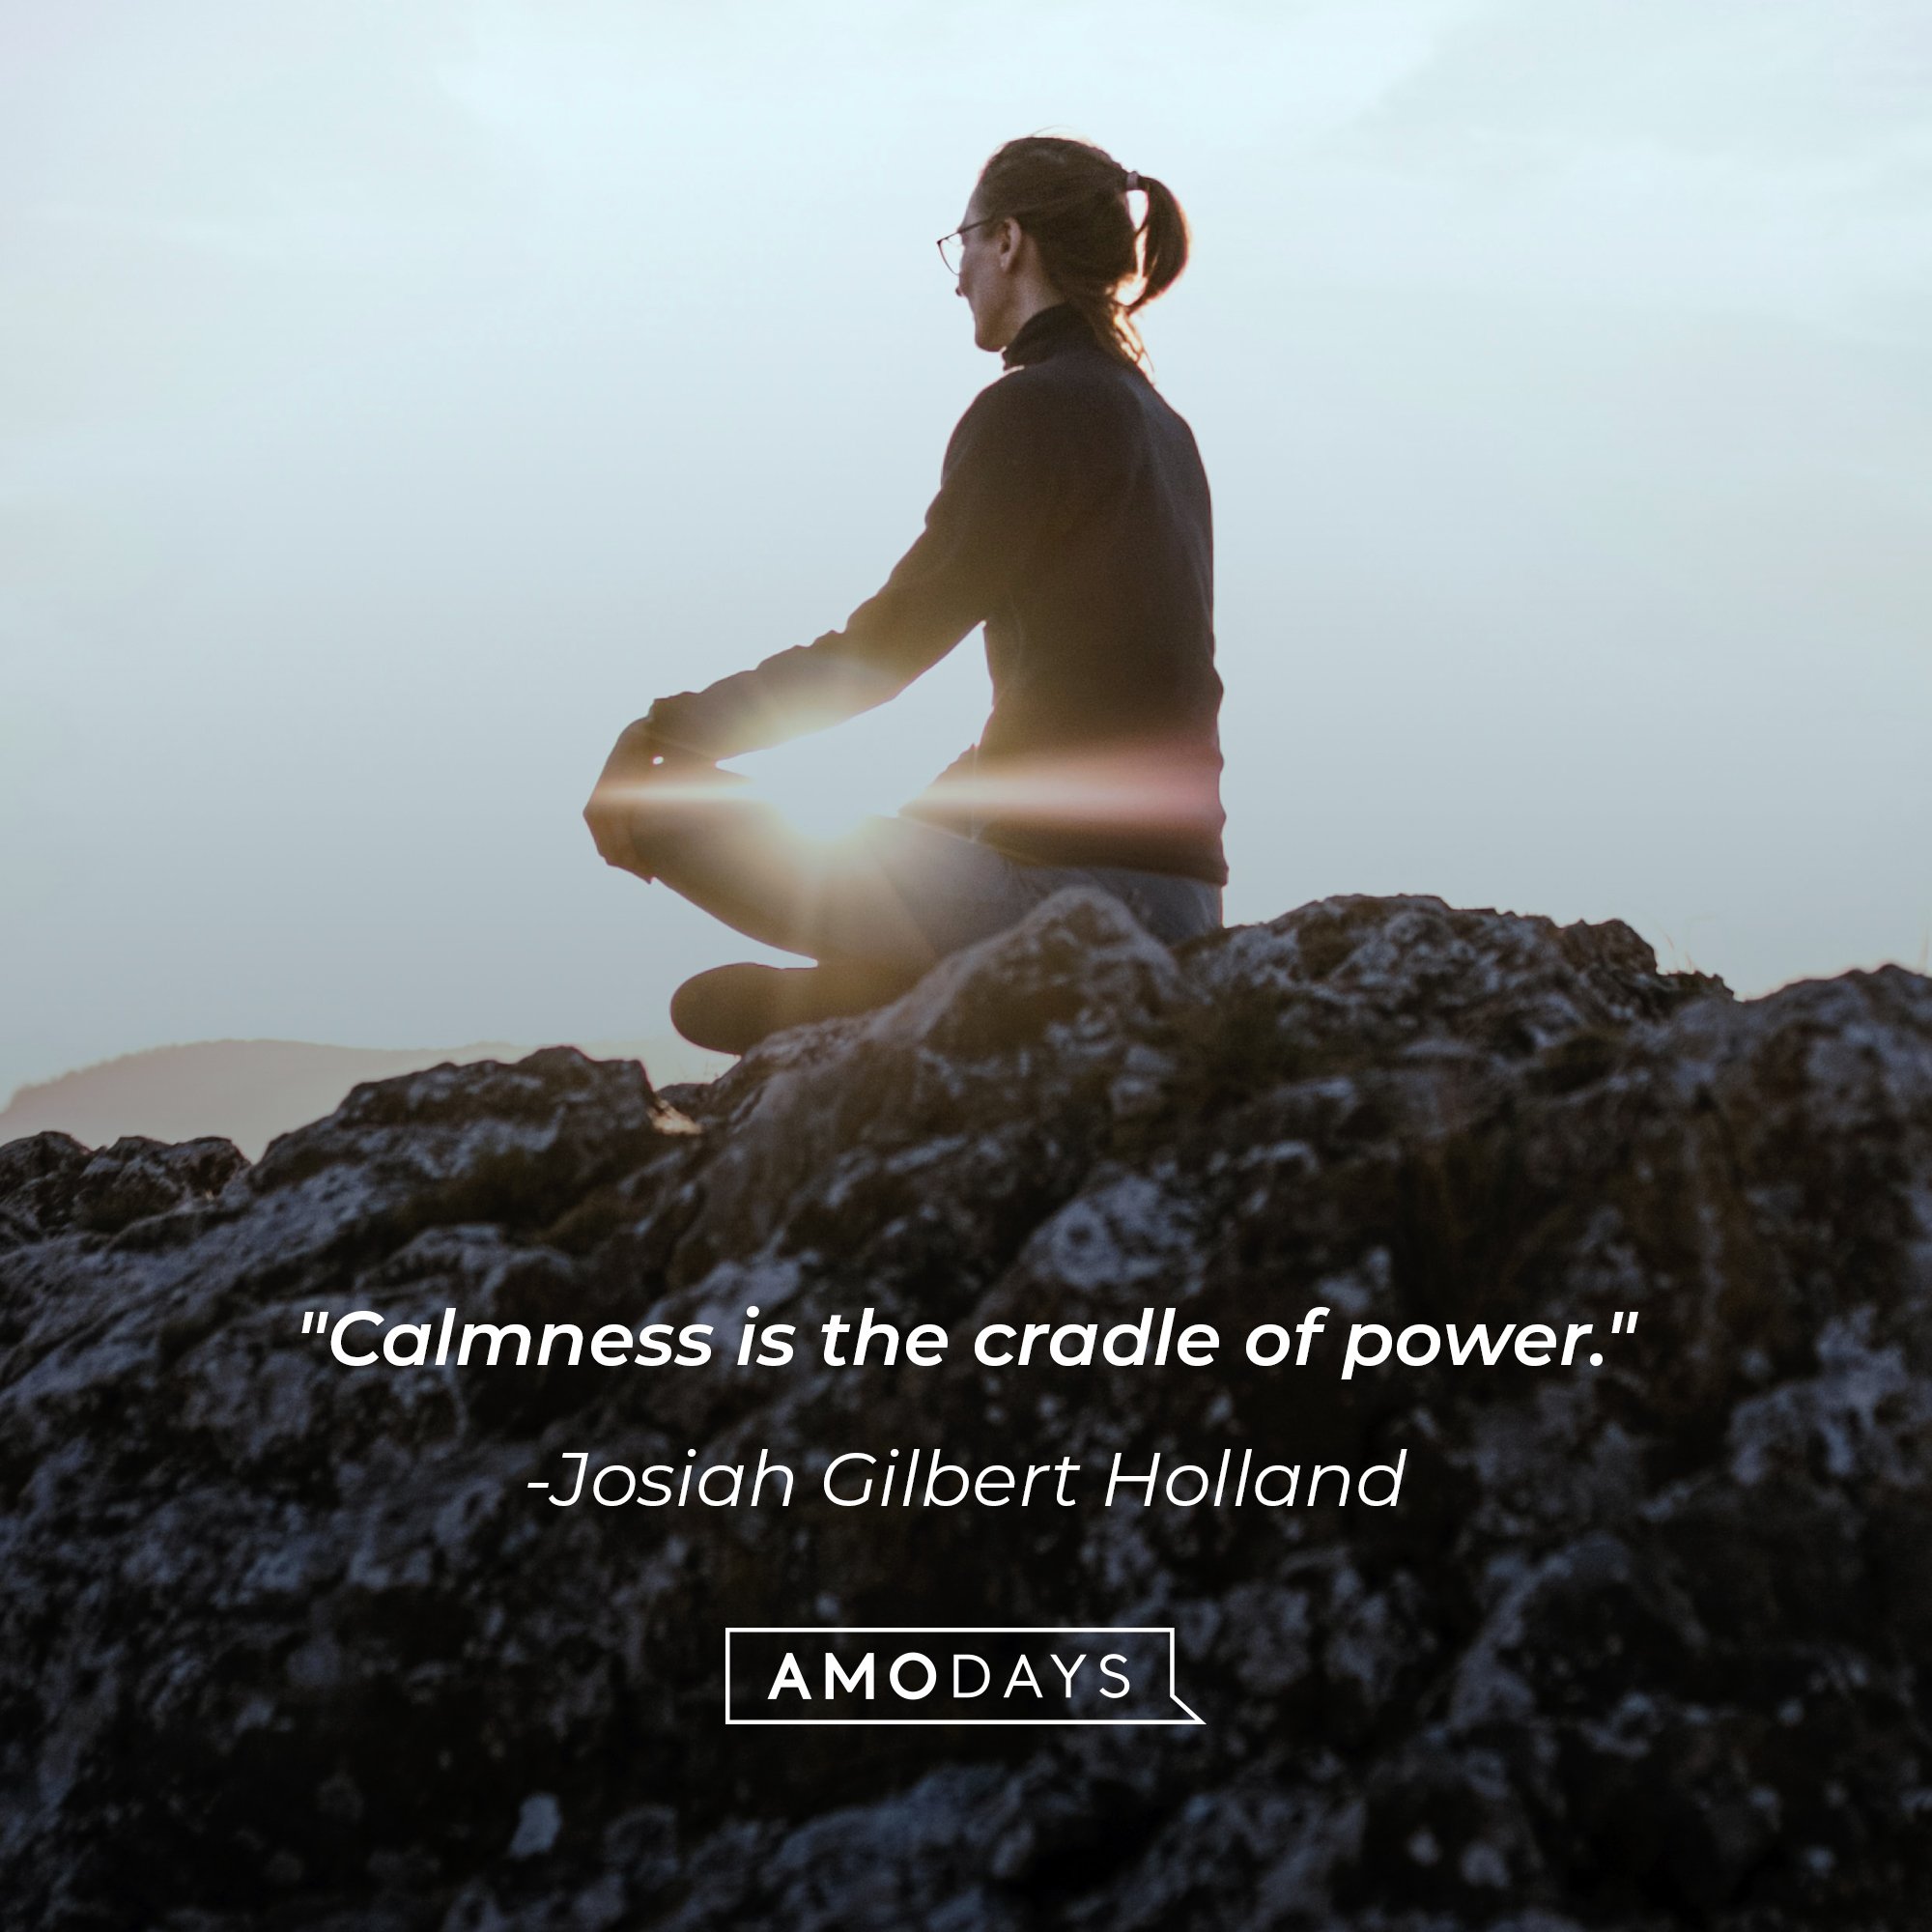 Josiah Gilbert Holland’s quote: "Calmness is the cradle of power." | Image: AmoDays